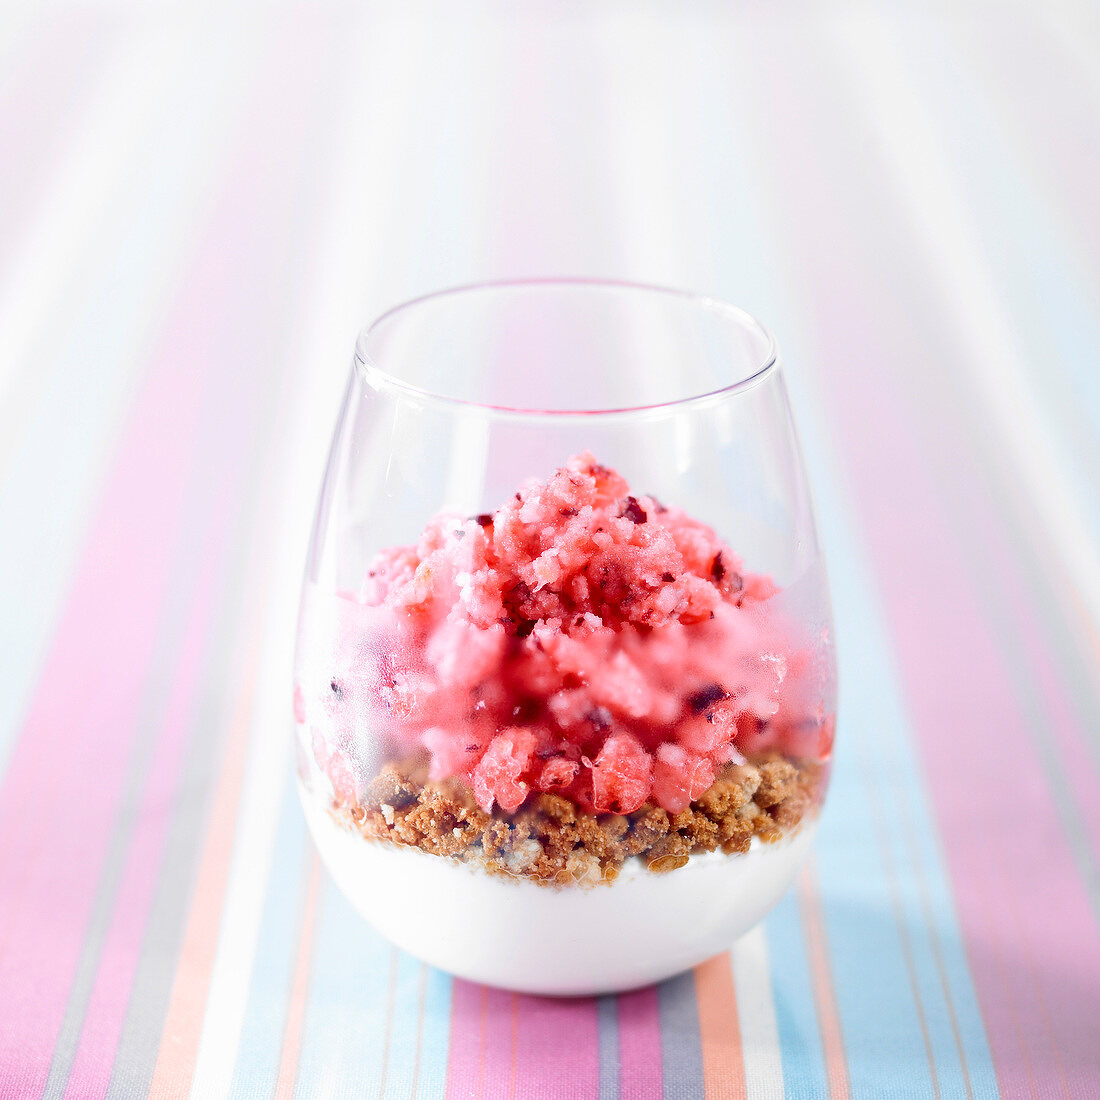 Cranberry granita with crumbled cookies and Fromage blanc